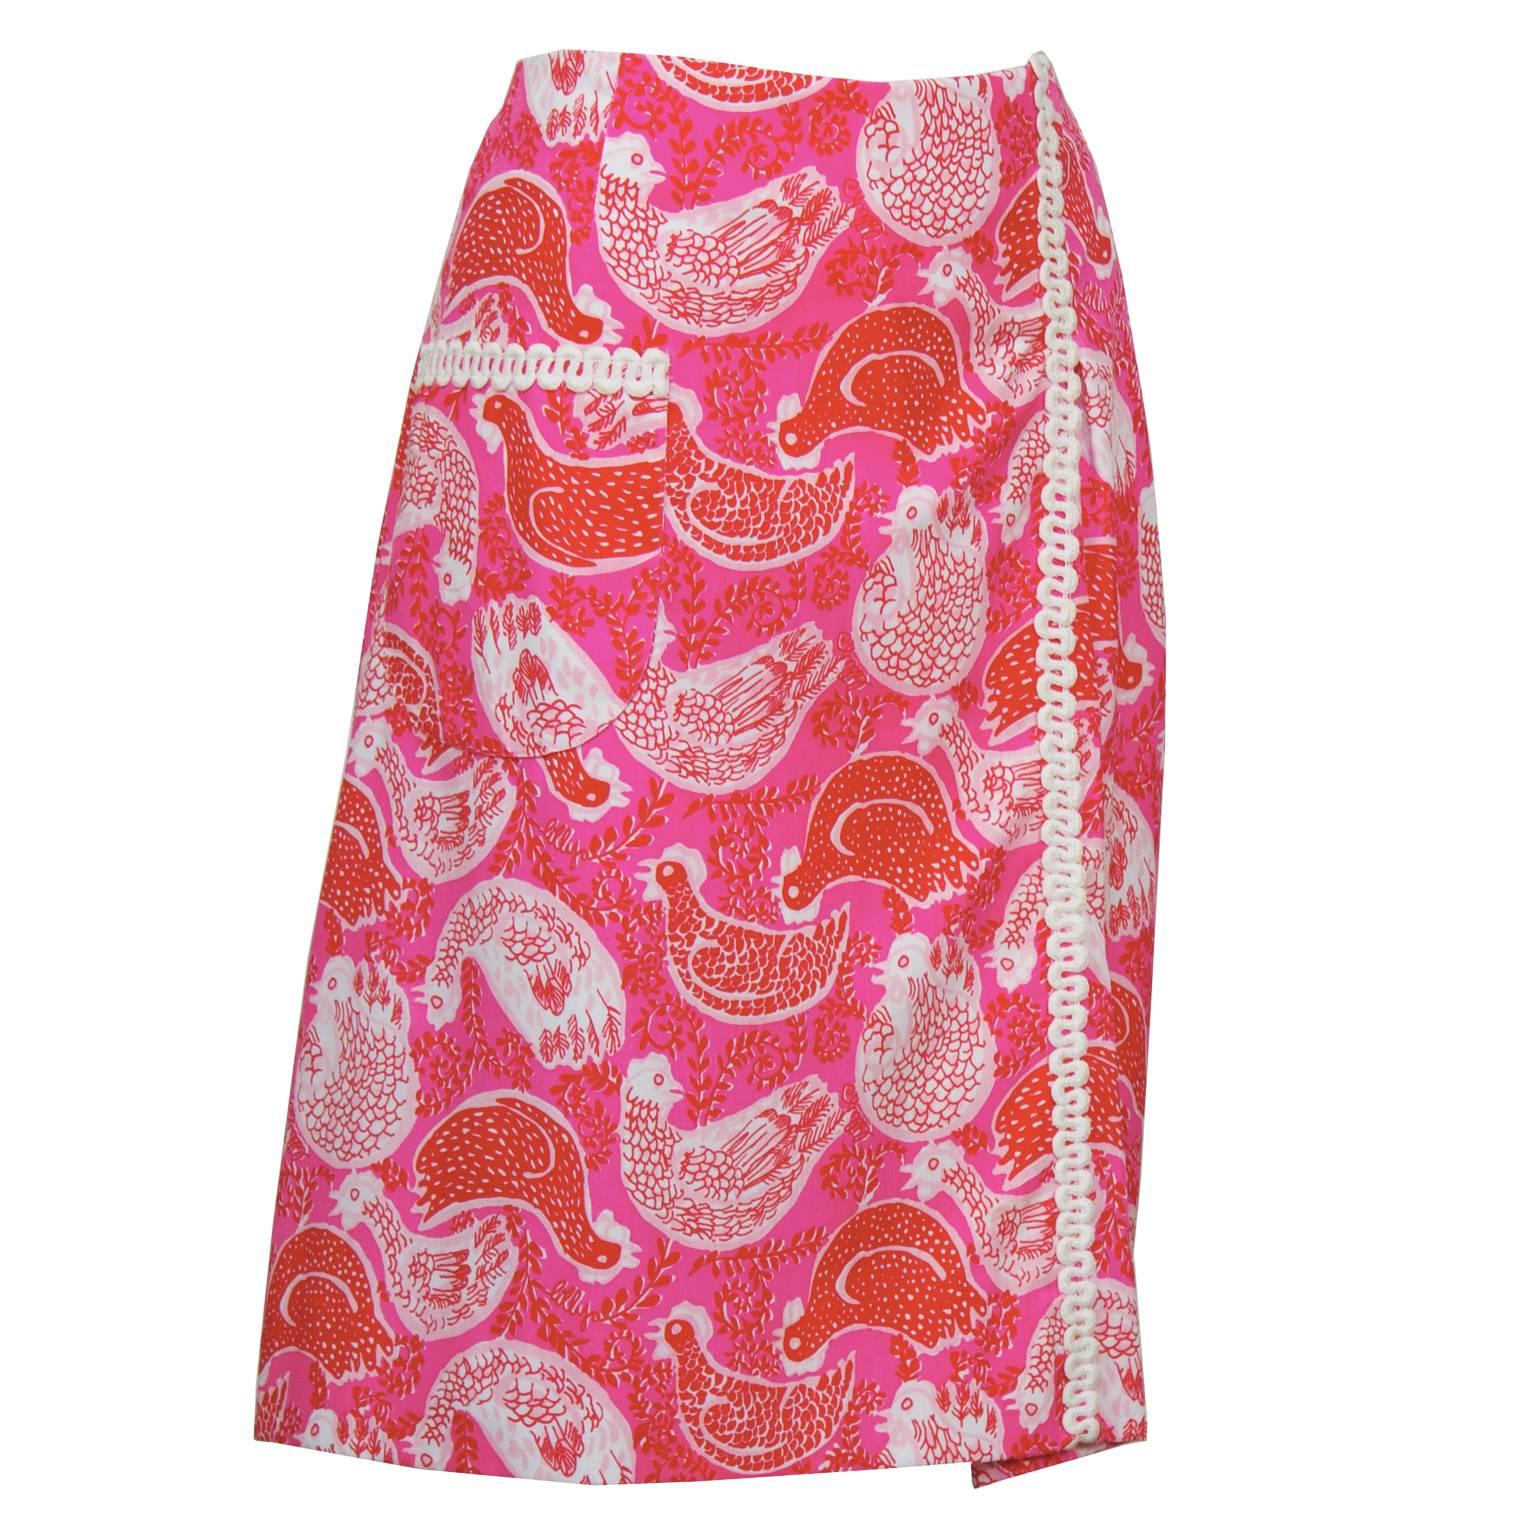 Pink and red rooster print Lilly Pulitzer wrap skirt from the 1960's. The skirt has one patch pocket on the front and white rickrack trim. In excellent, like-new condition, fits like a US 8-10.